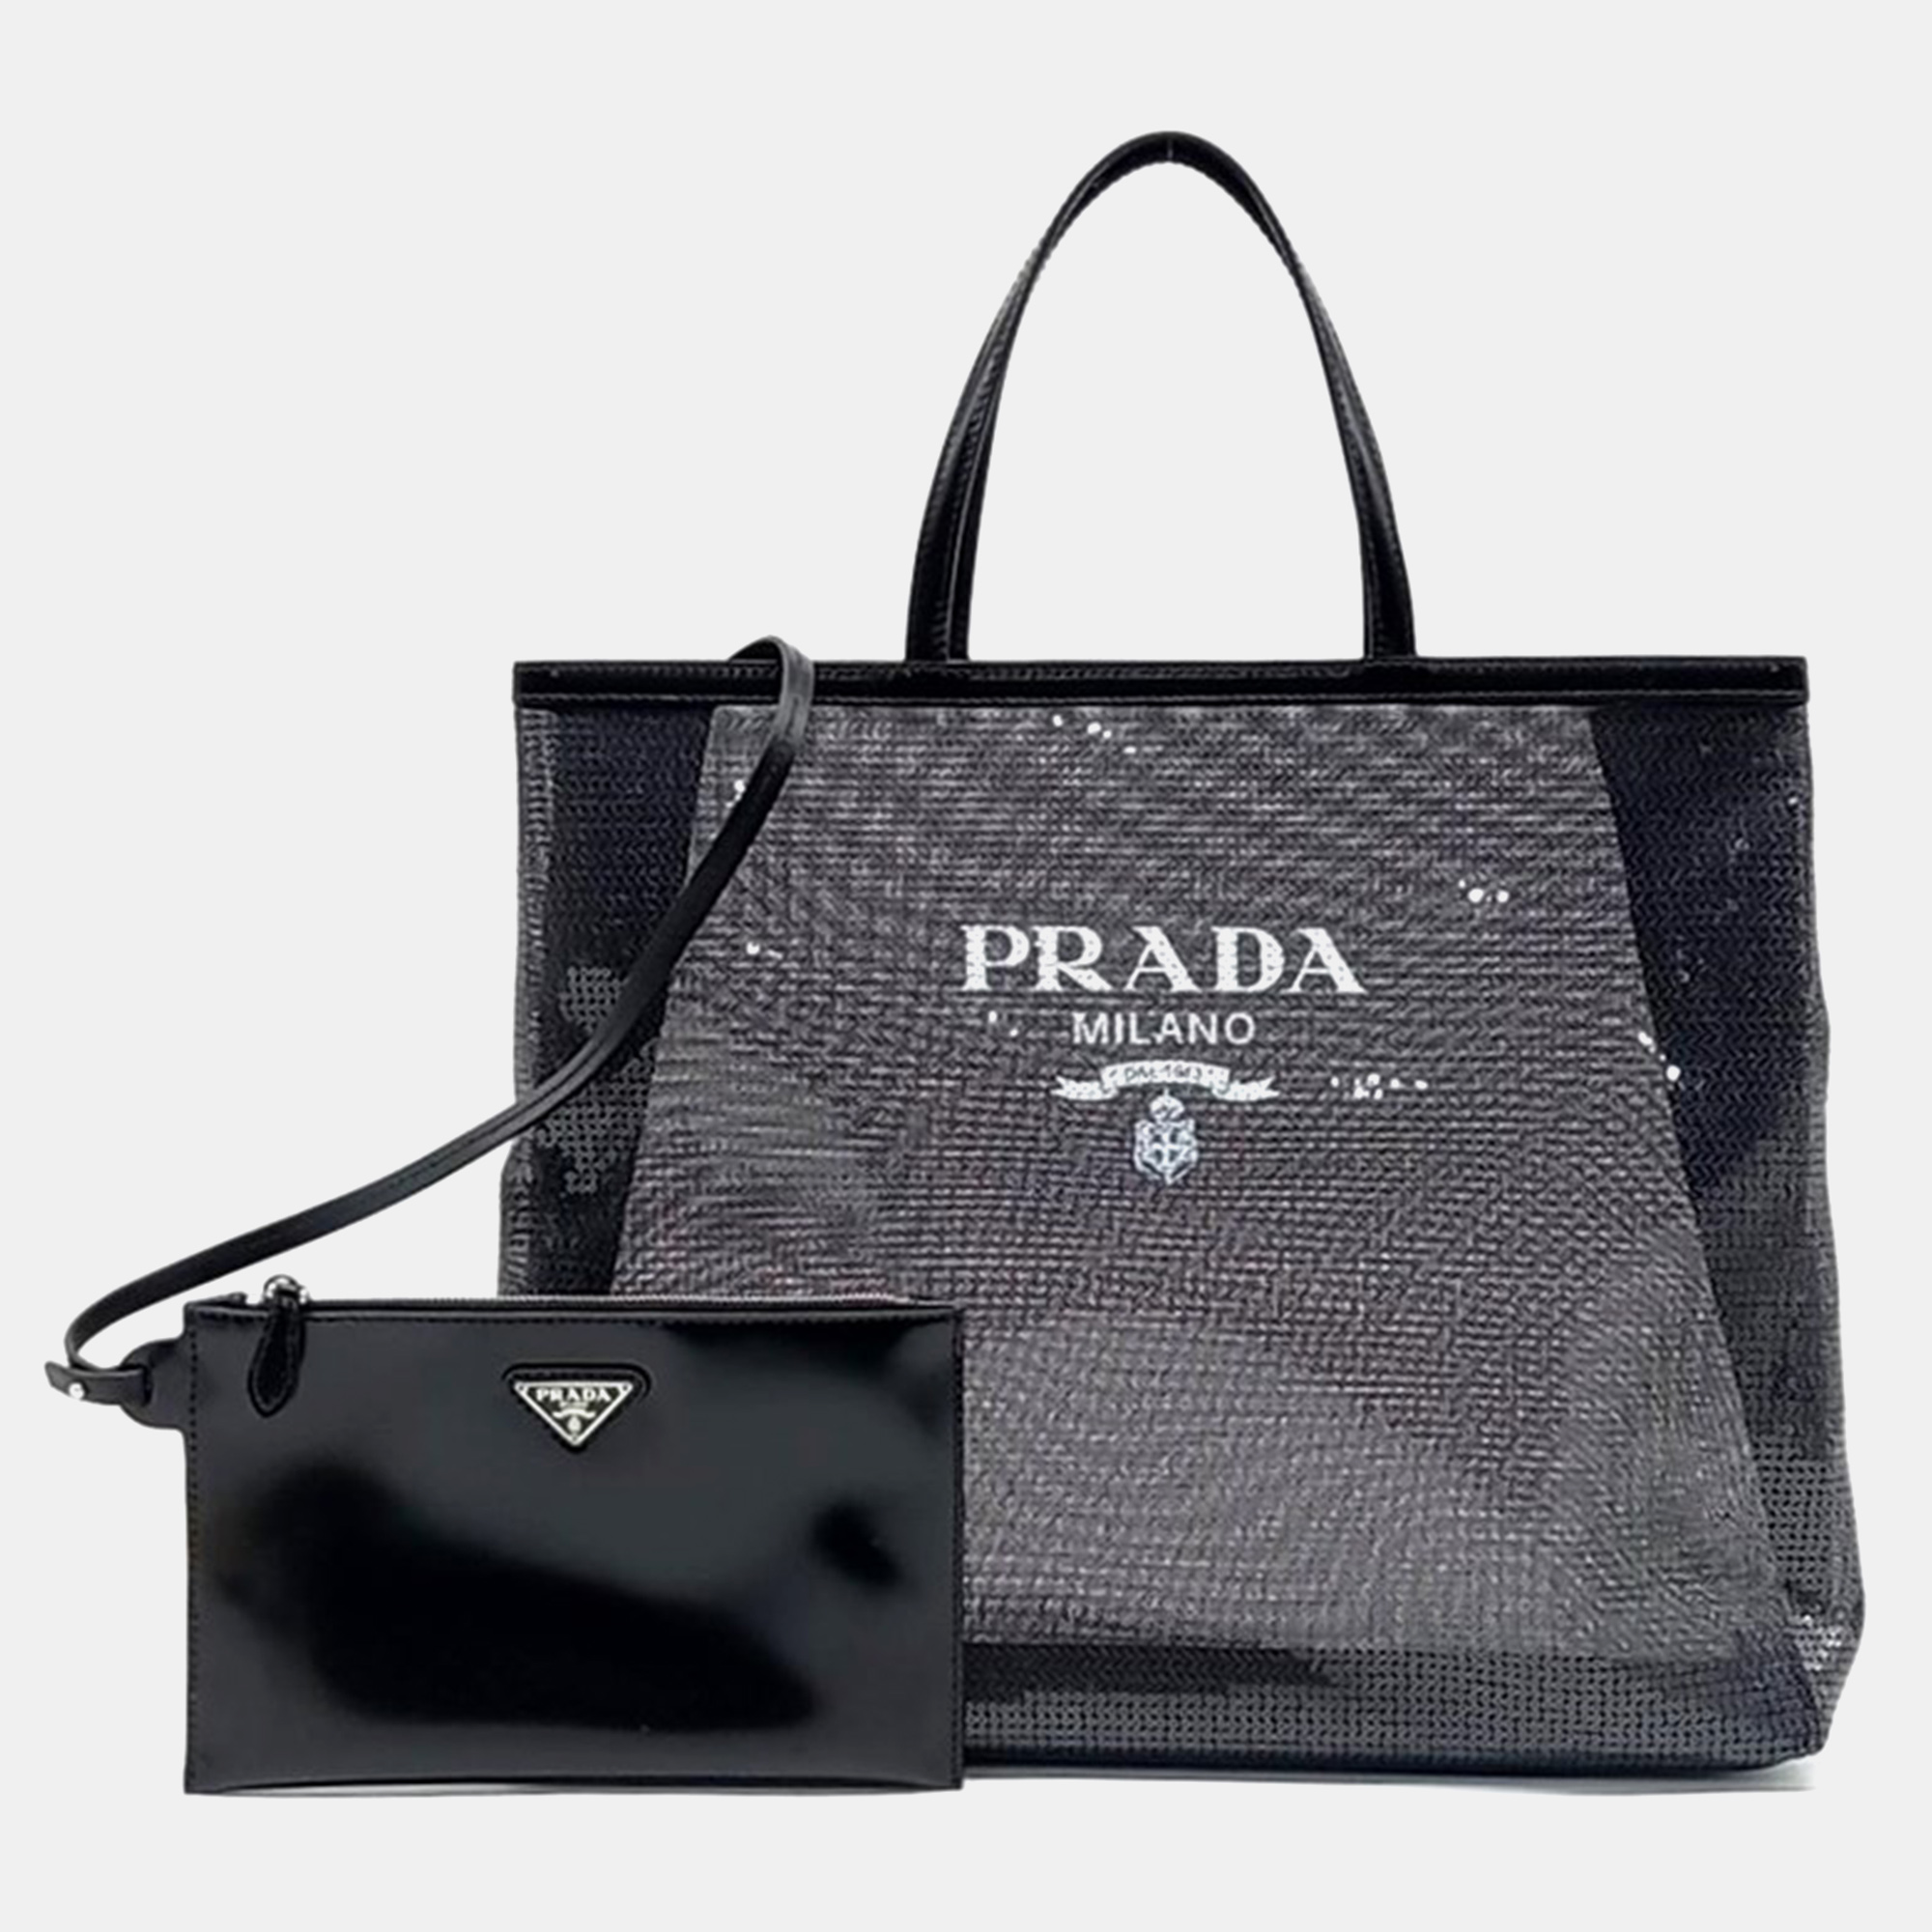 Uncompromising in quality and design this Prada tote is a must have in any wardrobe. With its durable construction and luxurious finish its the perfect accessory for any occasion.